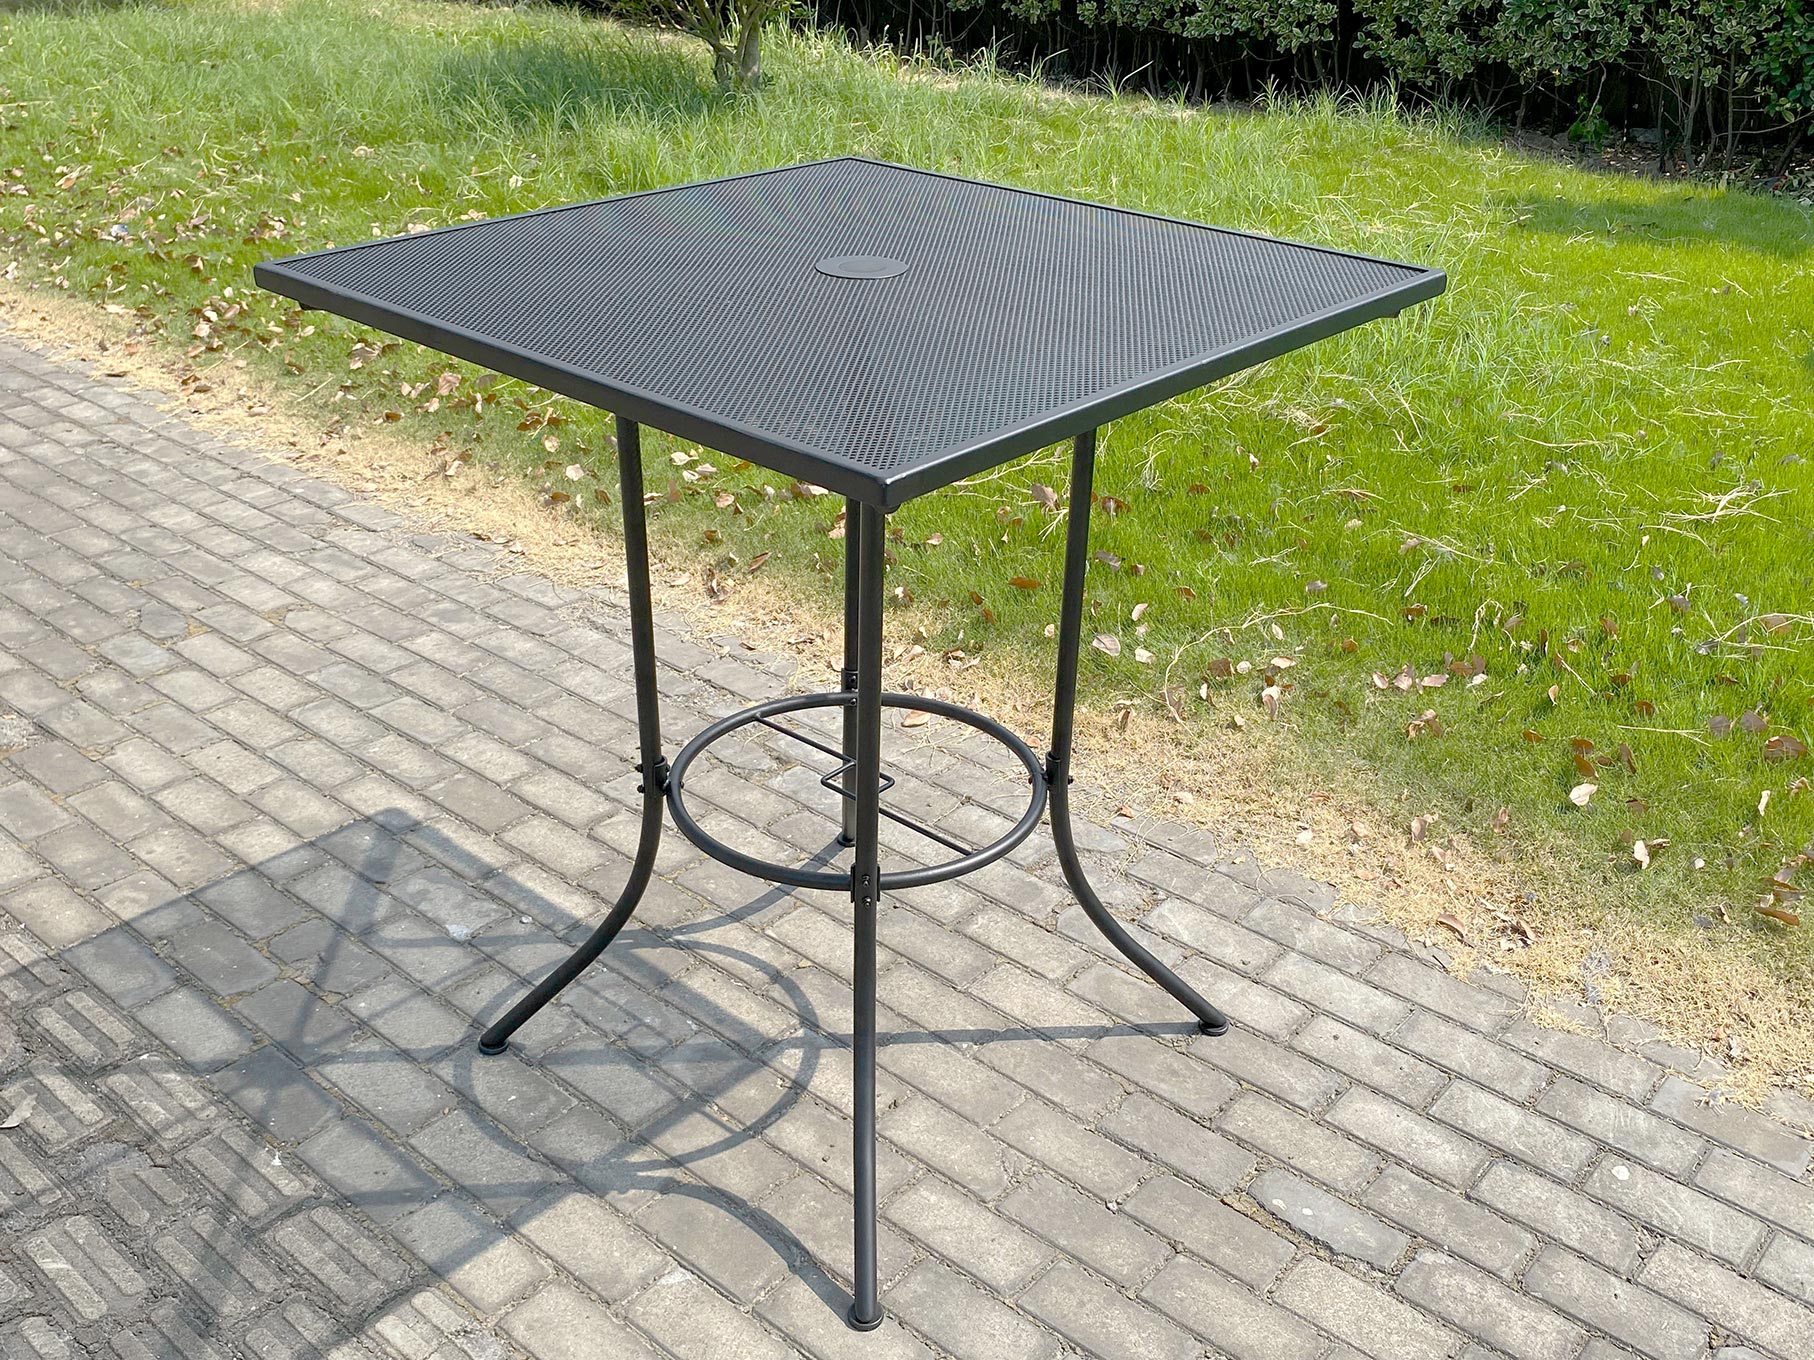 36” Square Table 41”H